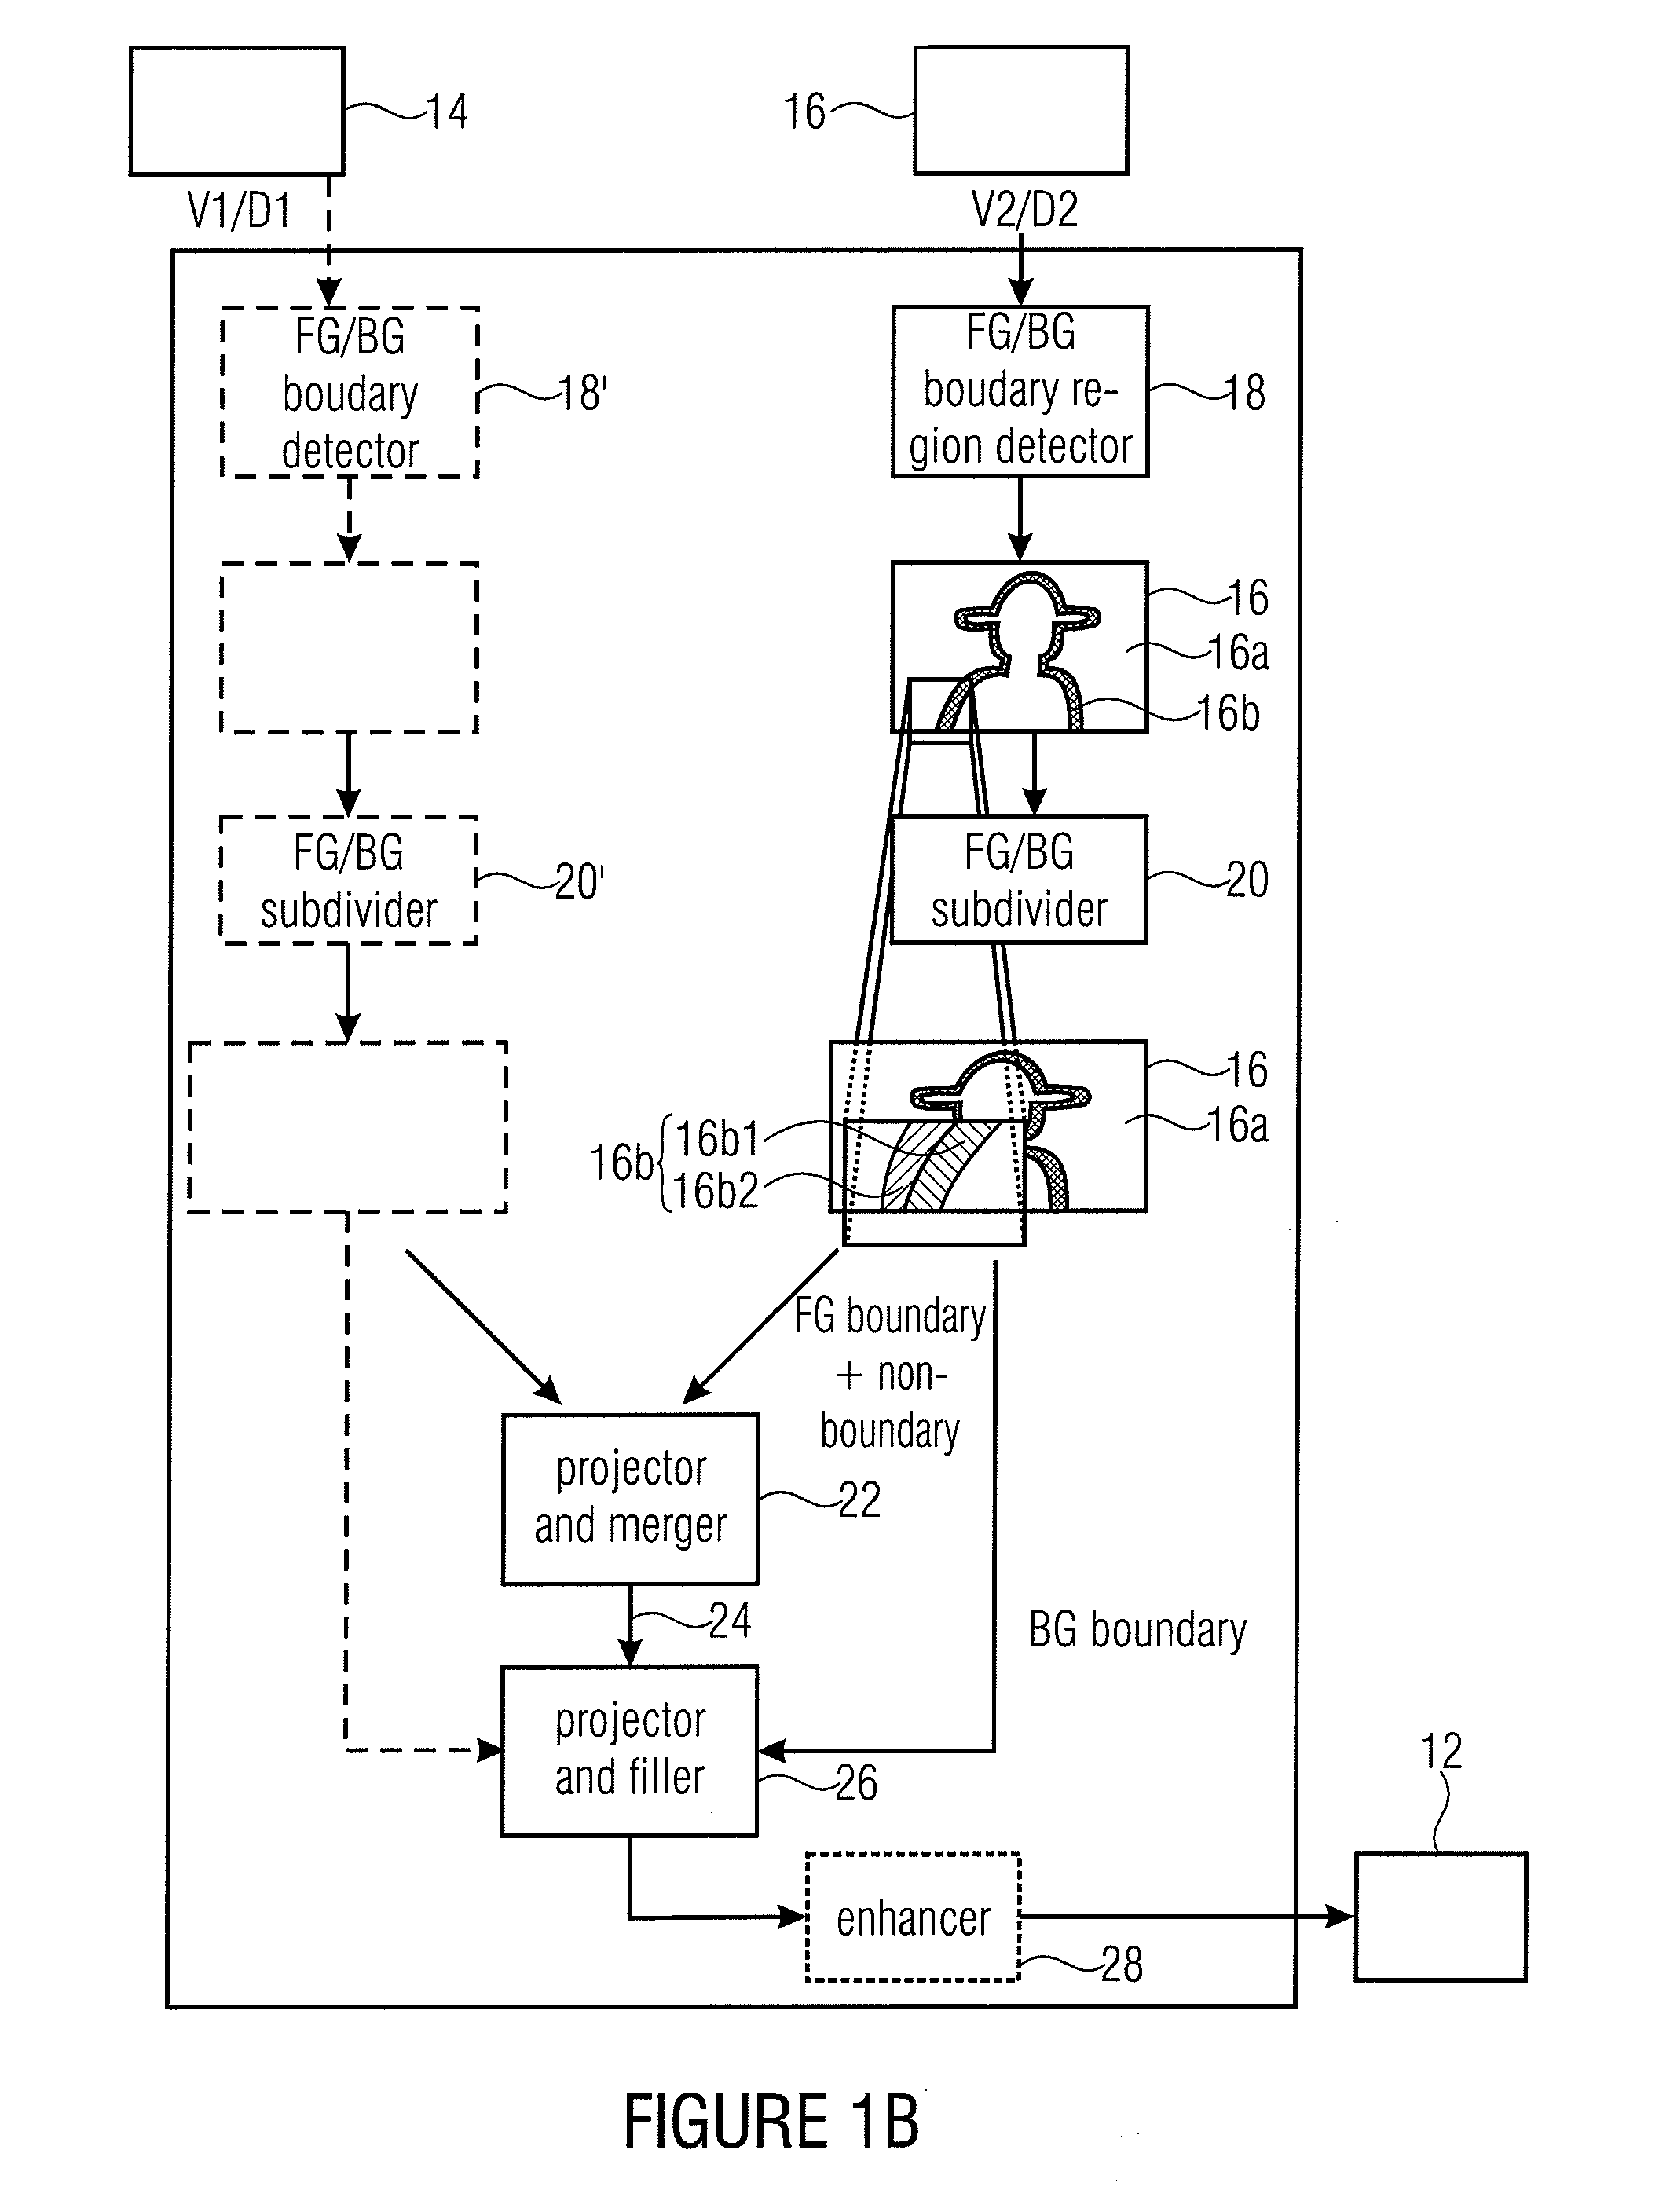 Intermediate View Synthesis and Multi-View Data Signal Extraction